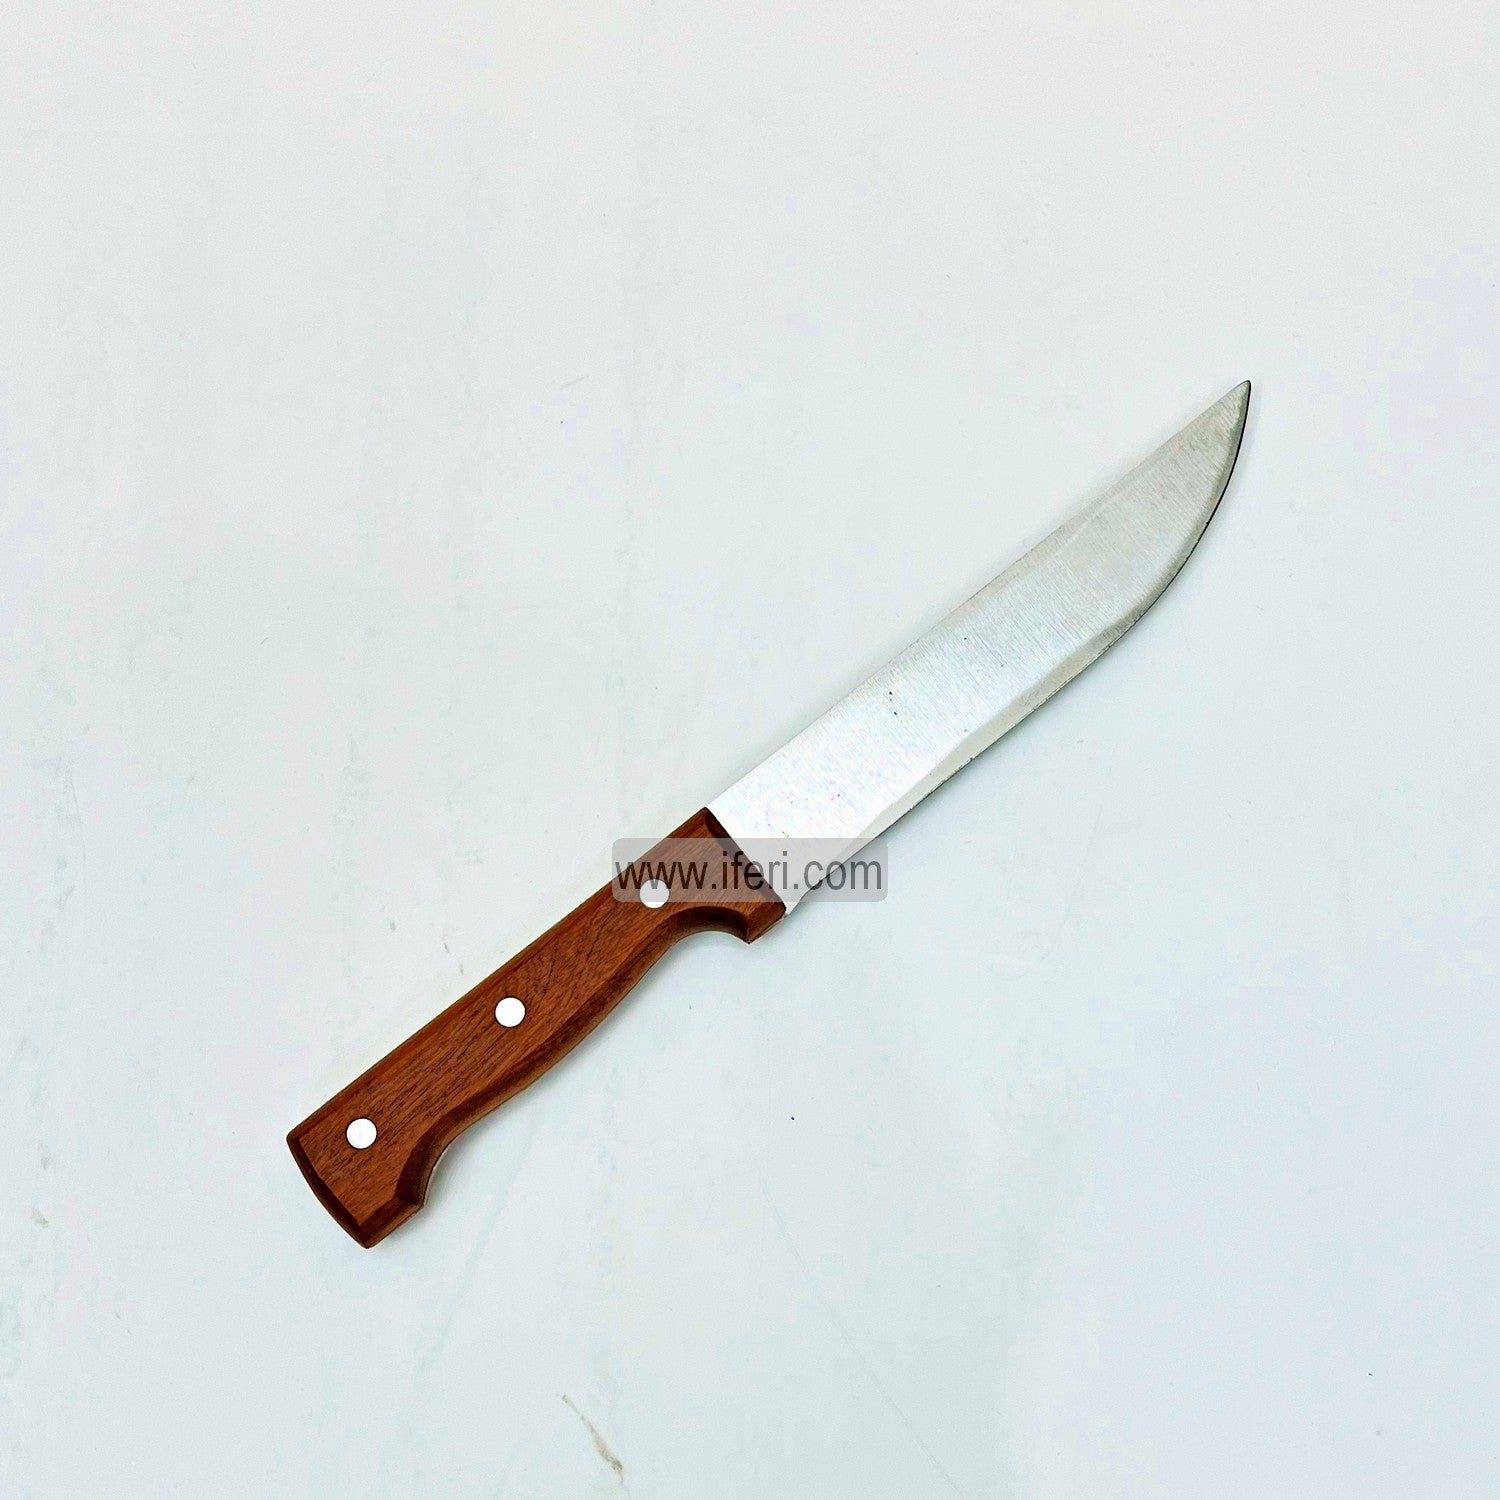 12 Inch Stainless Steel Kitchen Knife LB3640